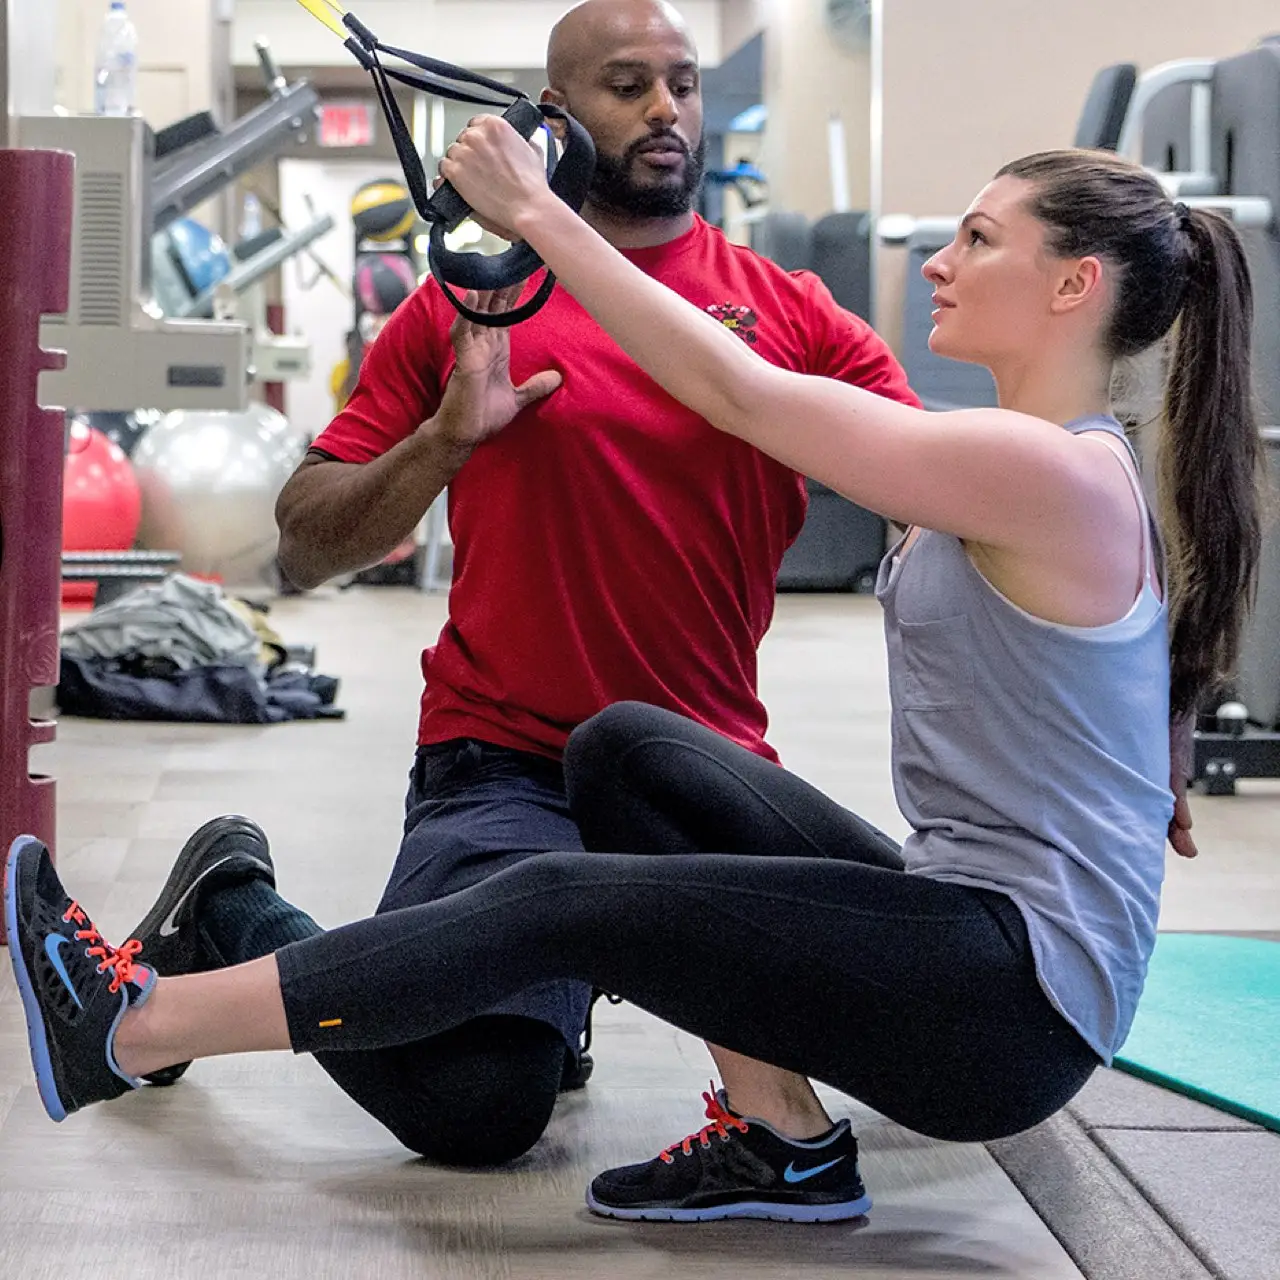 Top 10 Delaware, DE Personal Trainers To Fit Your Schedule